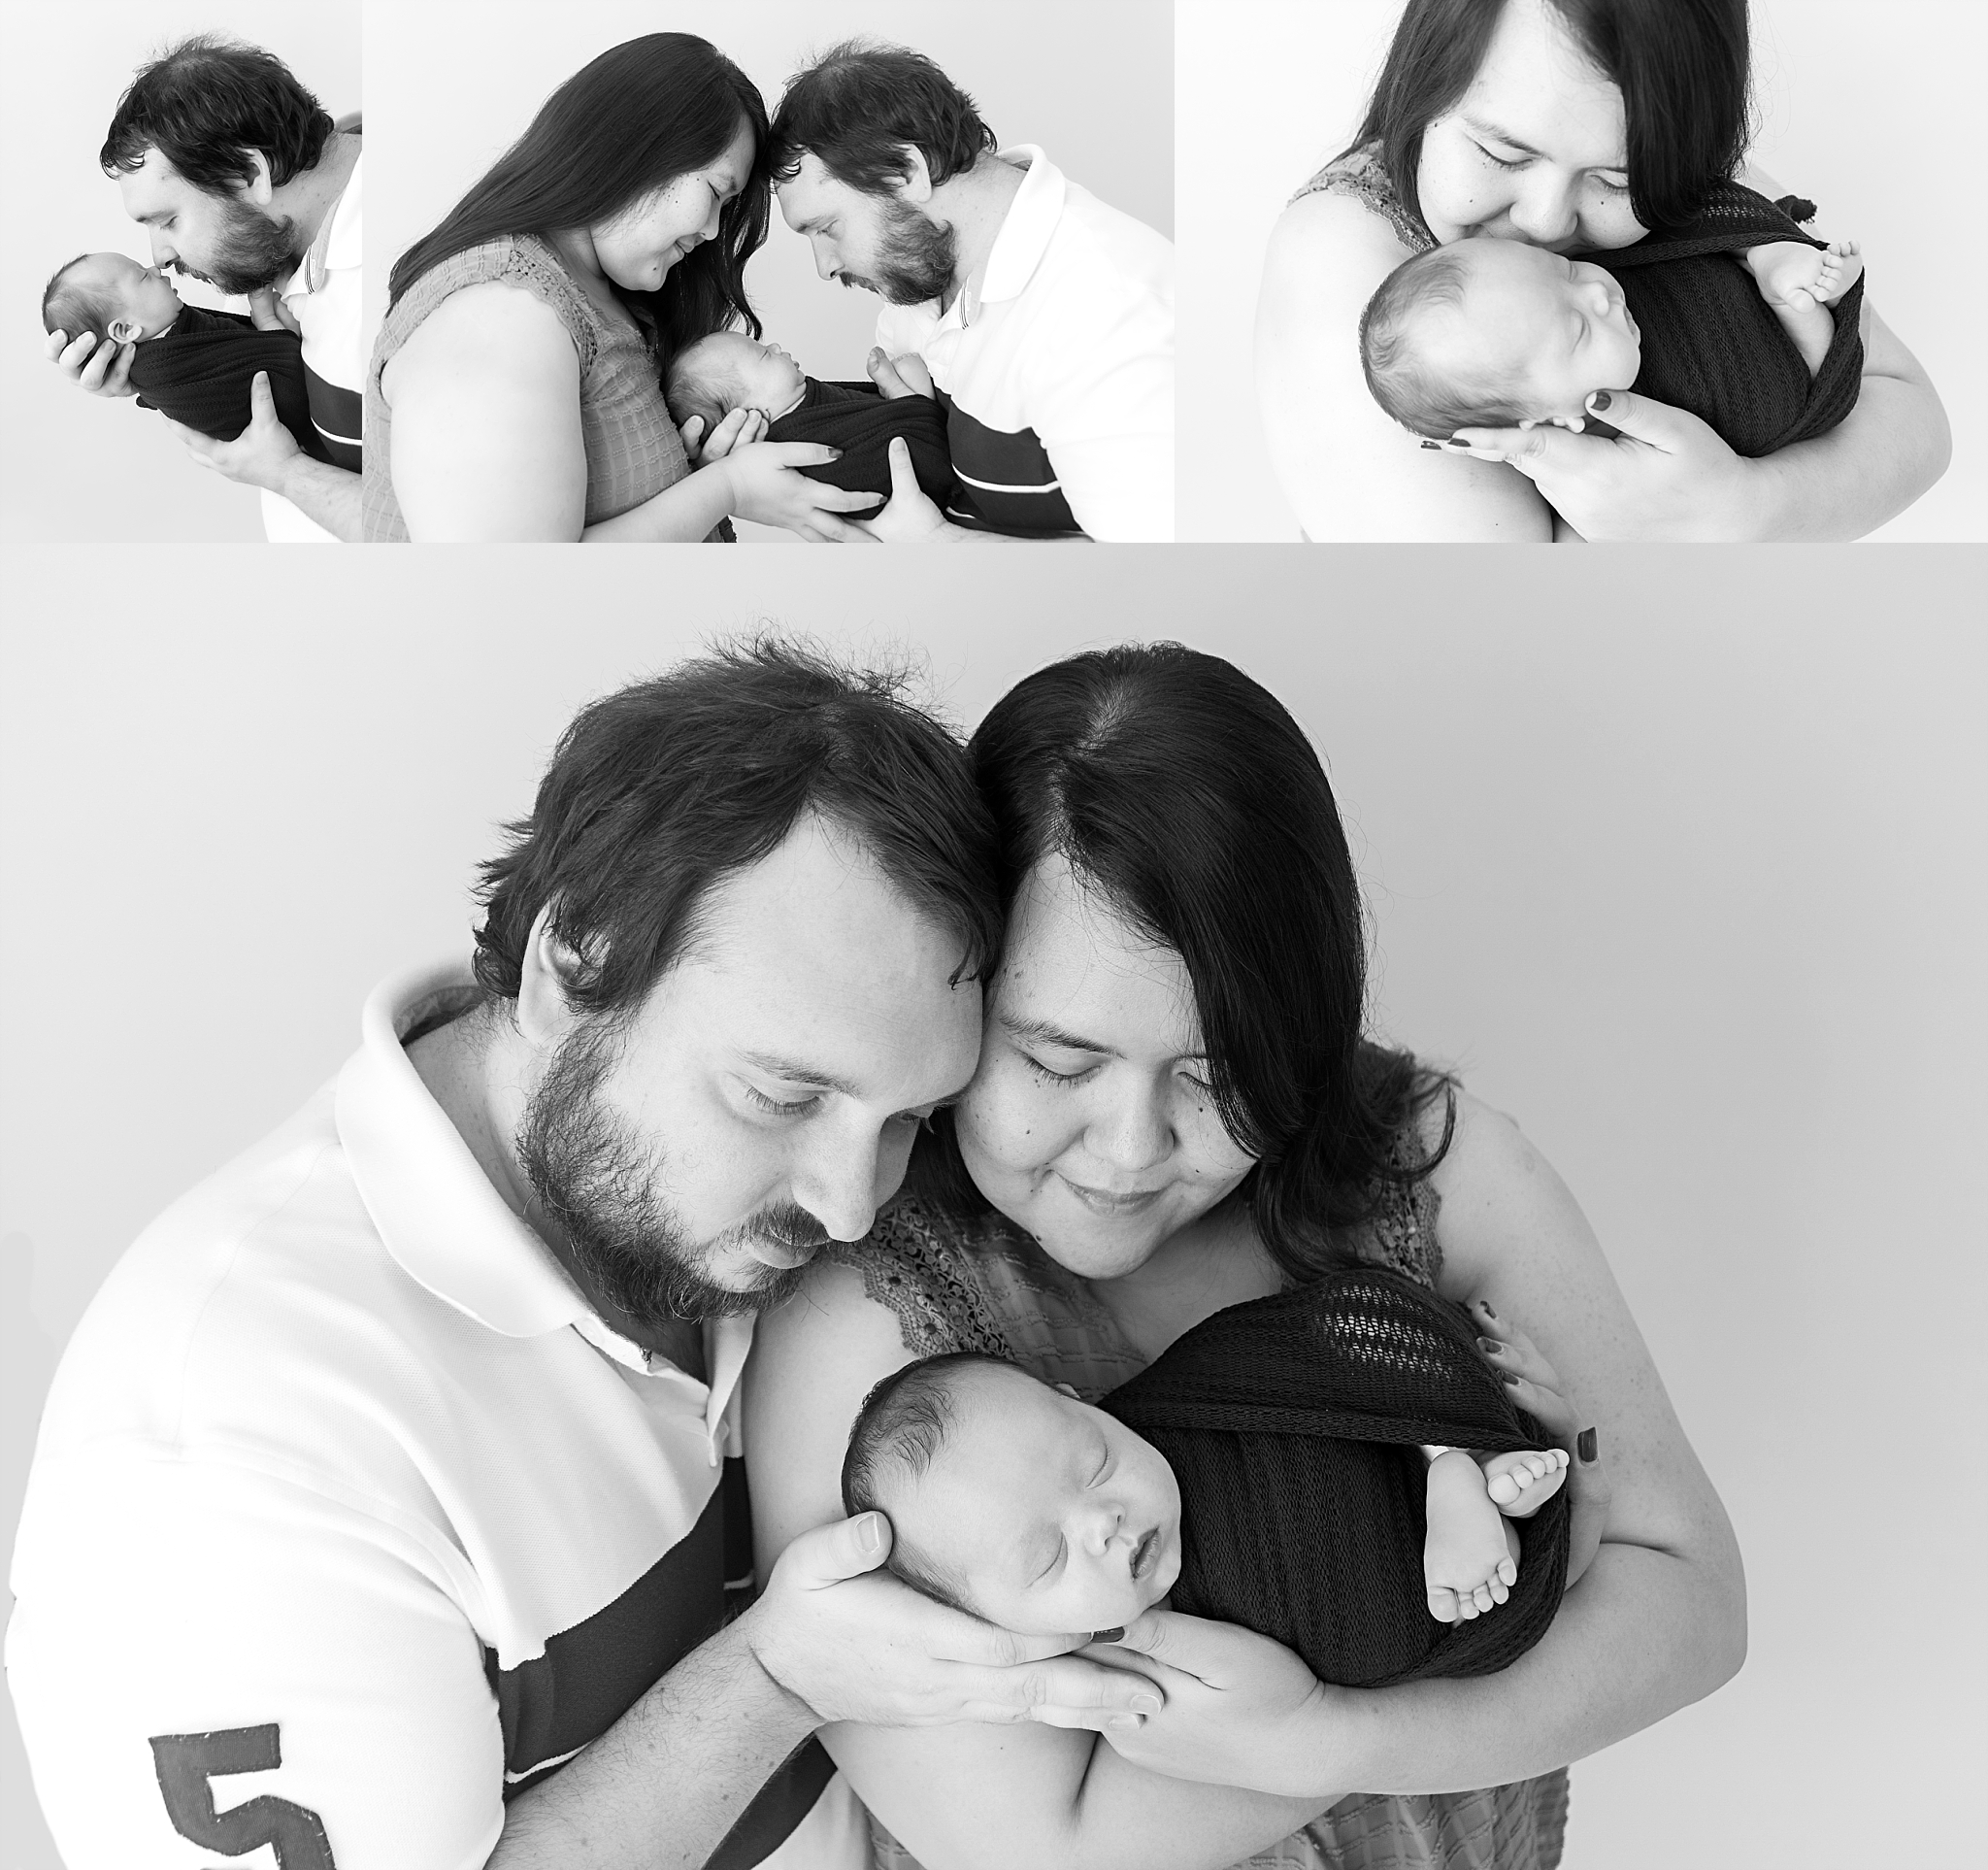 st-louis-newborn-photographer-baby-boy-with-mom-and-dad-in-black-and-white.jpg